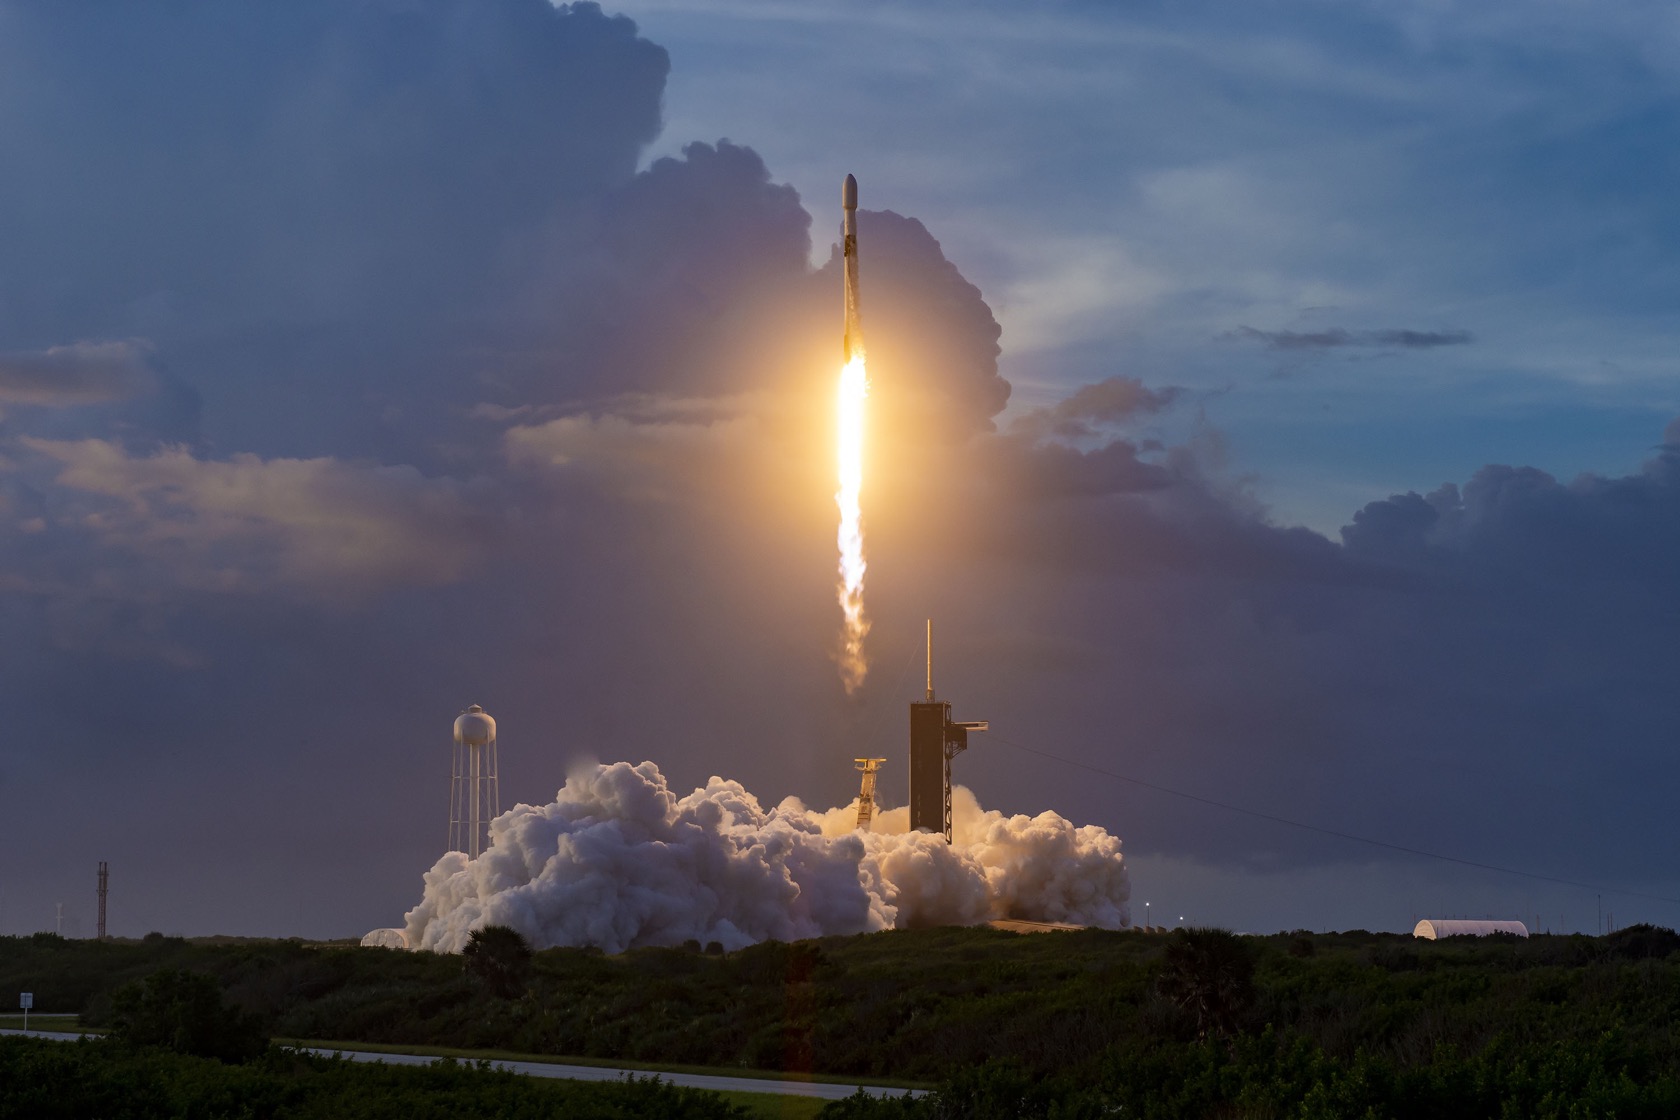 spacex falcon 9 rocket launch